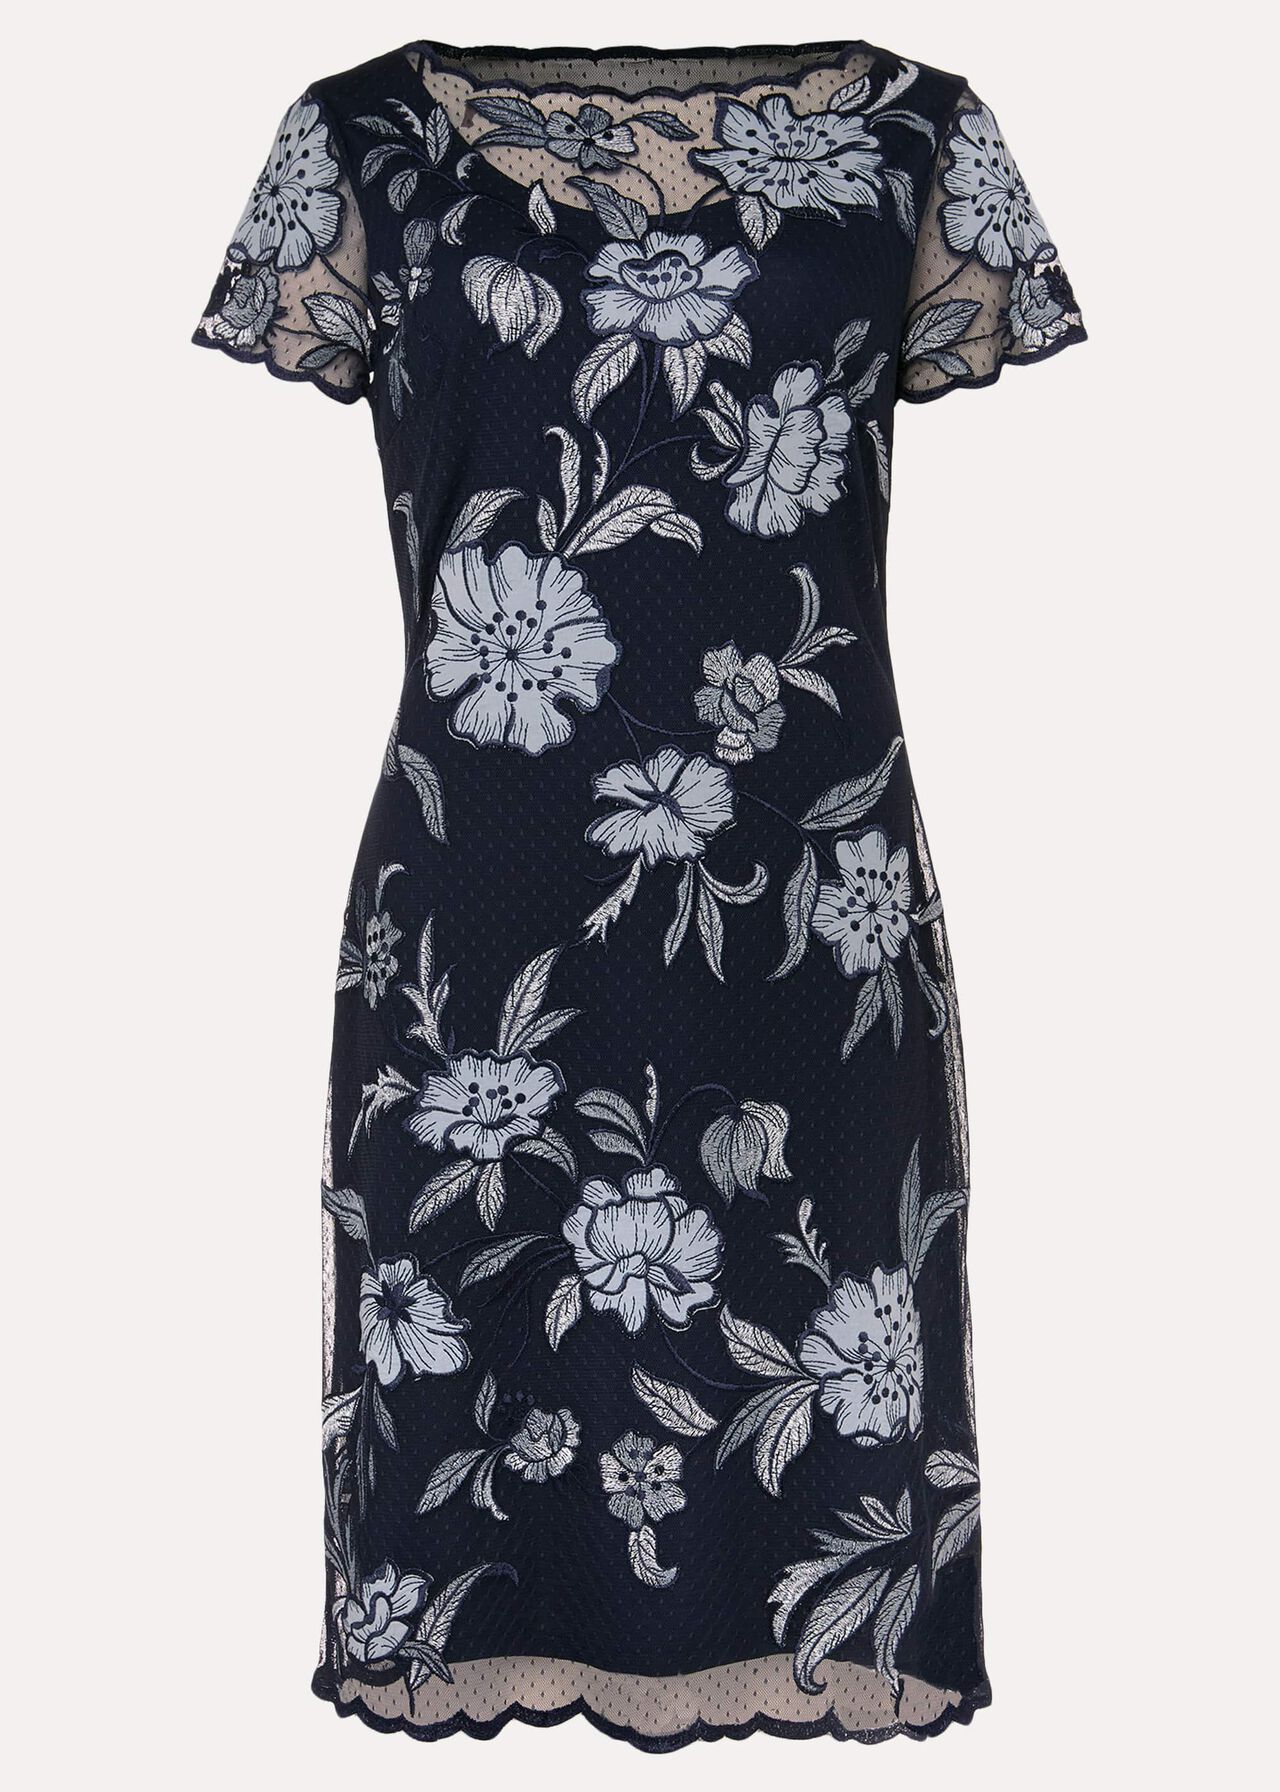 Hanna Floral Embroidered Dress | Phase Eight